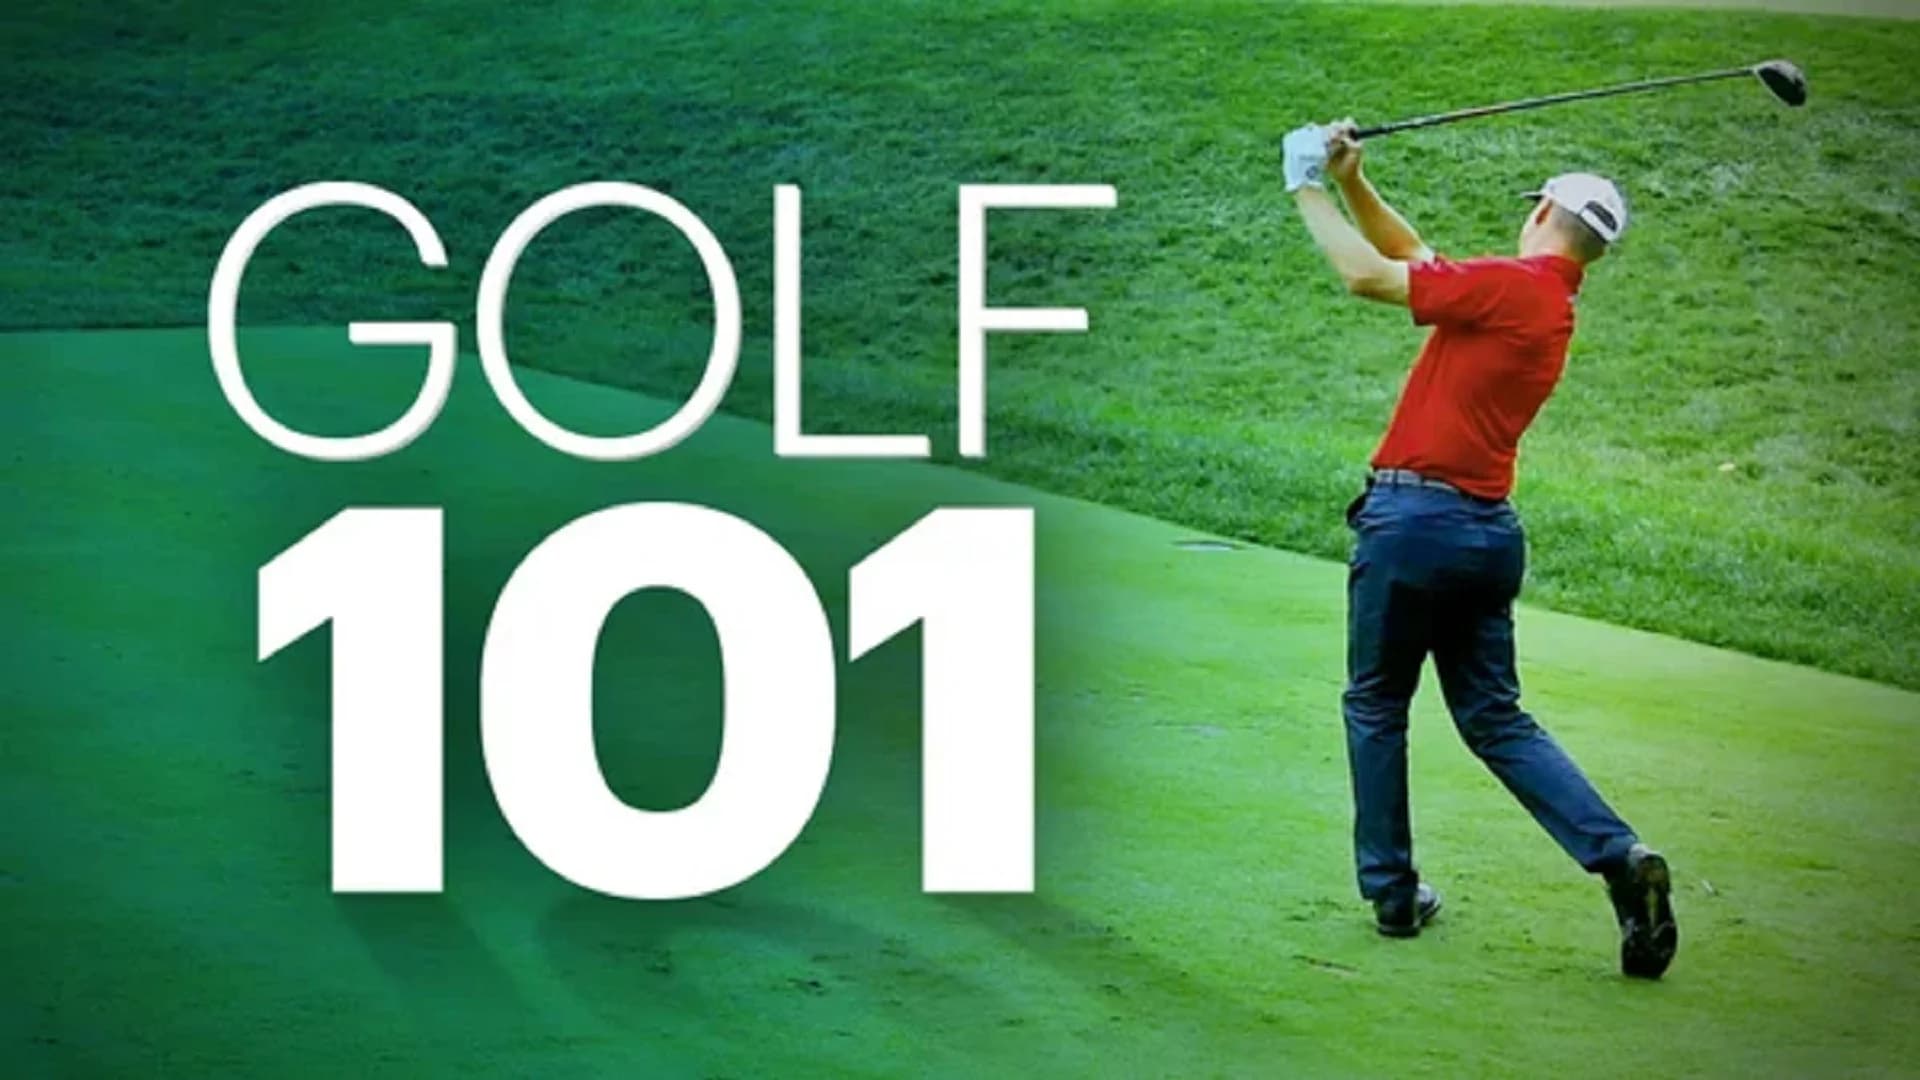 From clubs to etiquette - check out these golf tips before hitting the greens